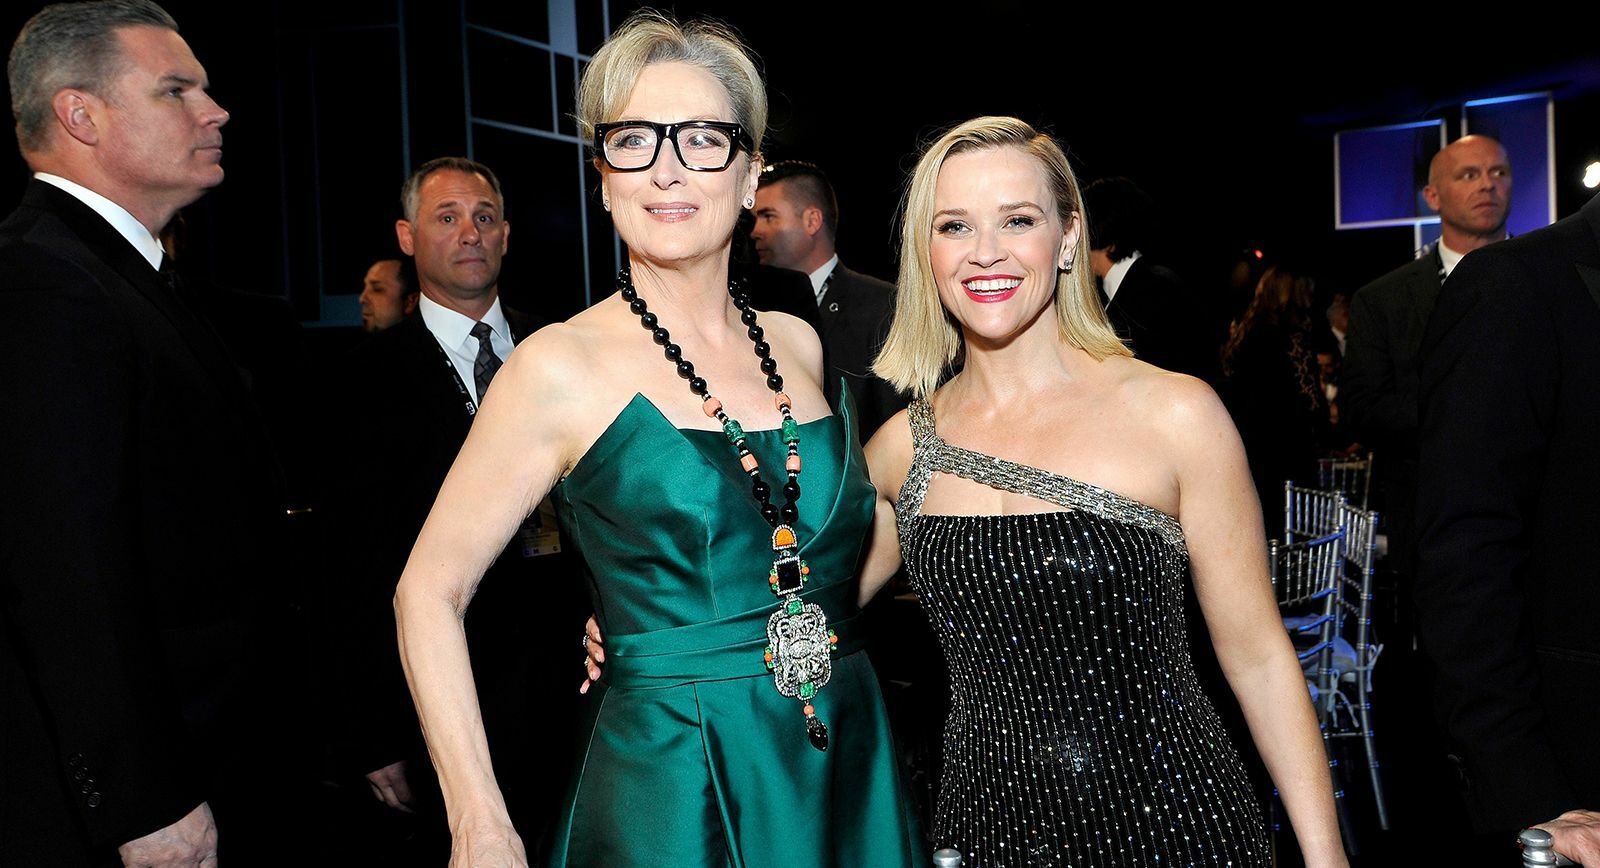 Meryl Streep and Reese Witherspoon at the SAG awards 2020